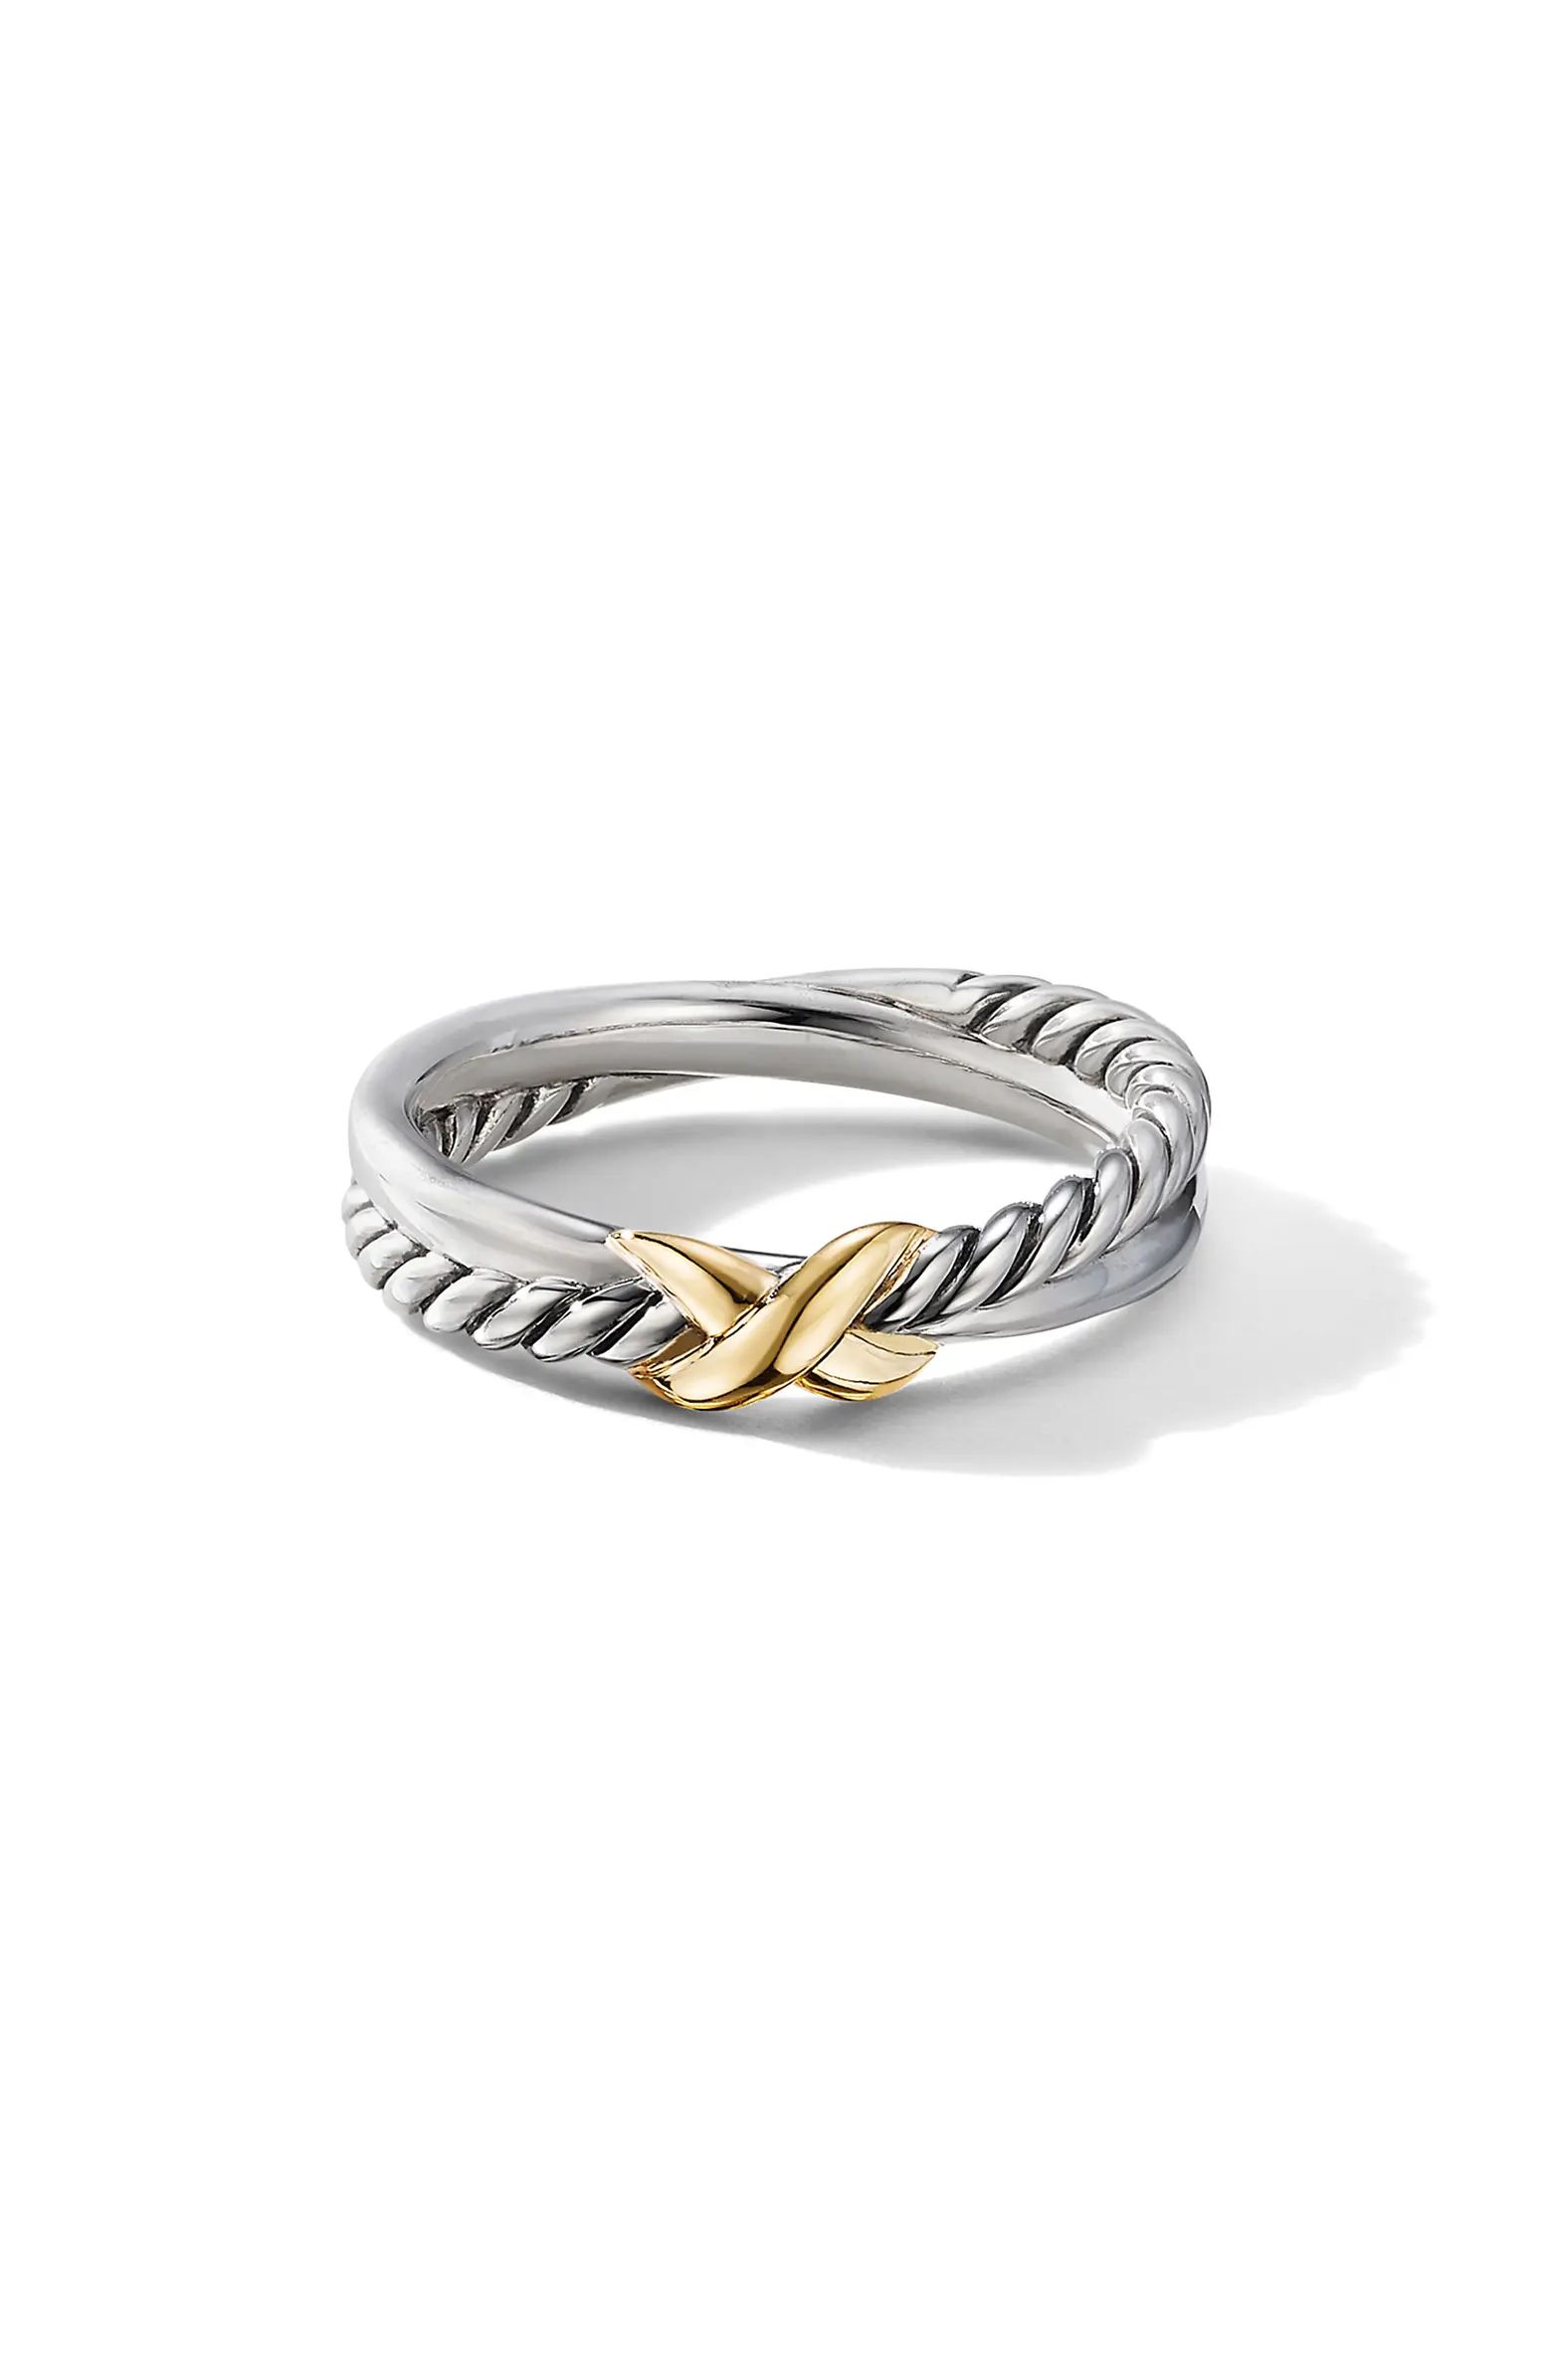 Petite X Ring in Sterling Silver with 18K Yellow Gold | Nordstrom